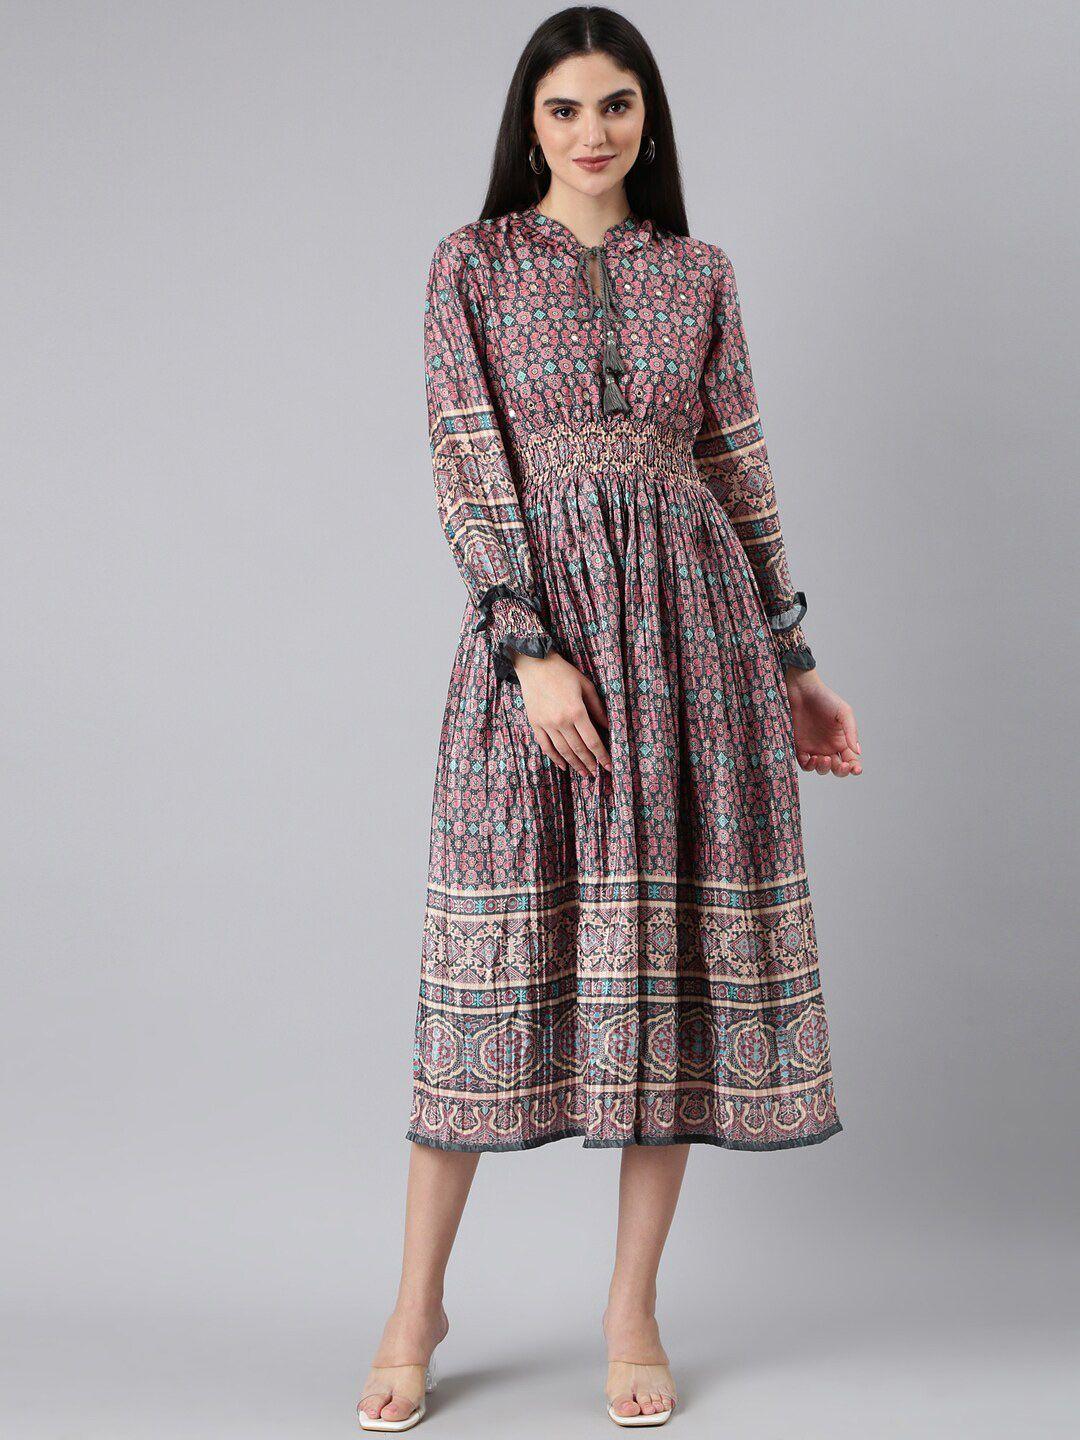 showoff-ethnic-motifs-printed-cuff-sleeve-tie-up-neck-smocked-fit-and-flare-midi-dress